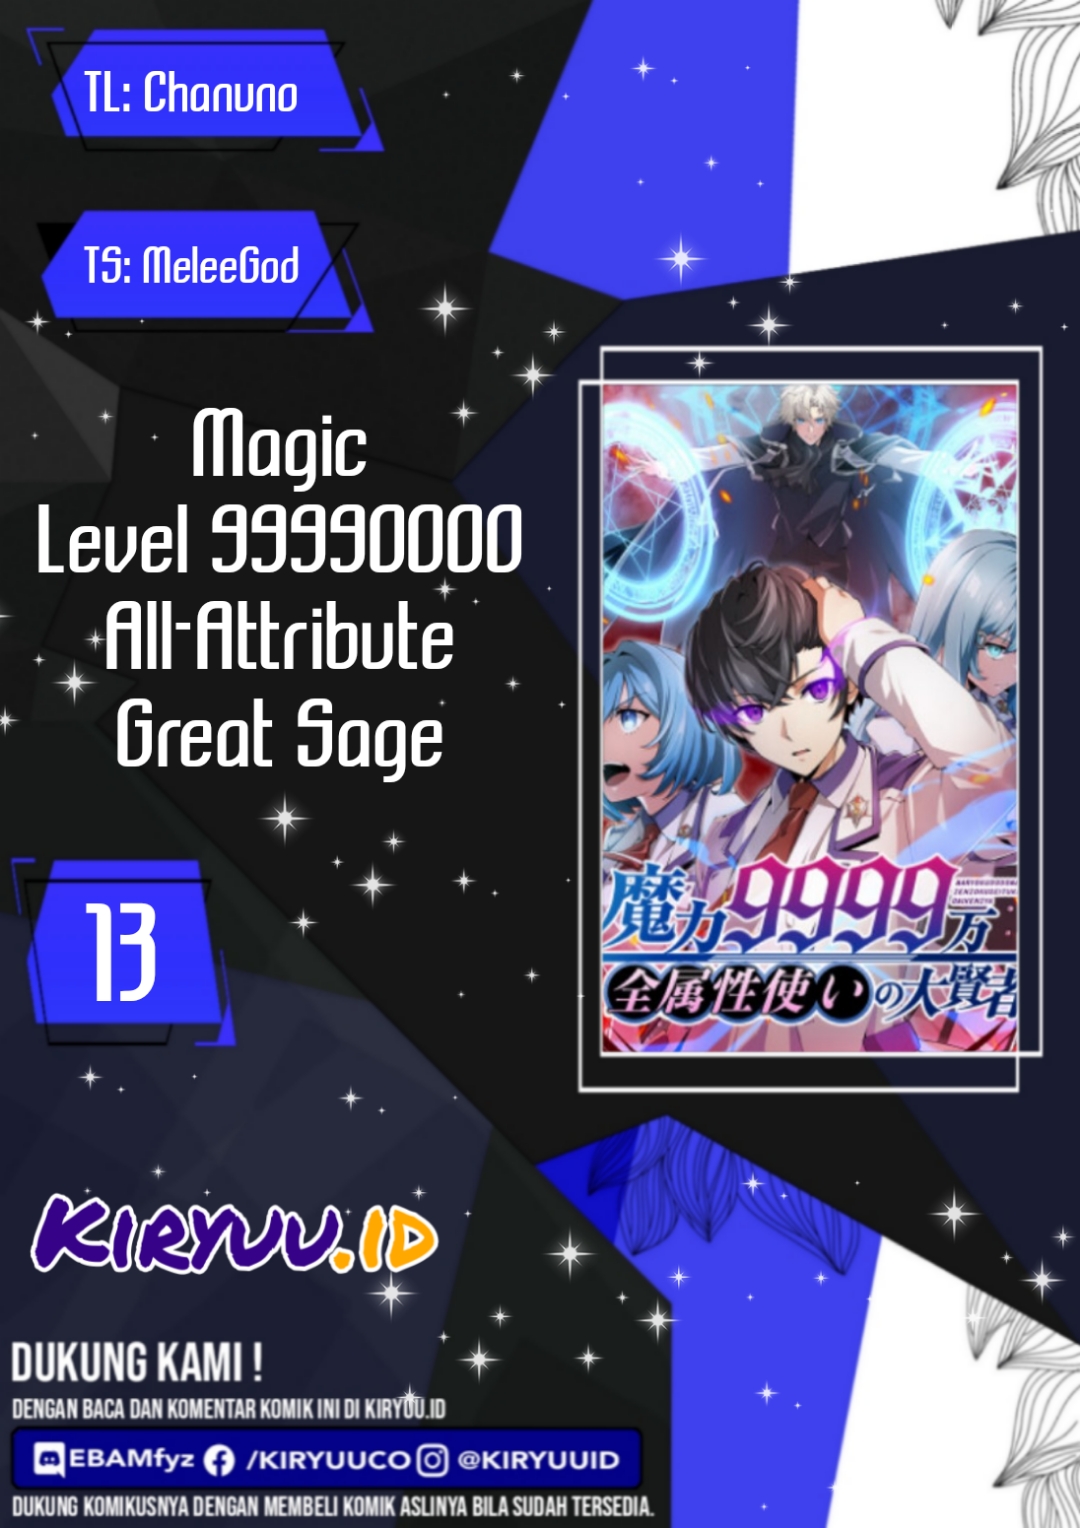 Magic Level 99990000 All-attribute Great Sage Chapter 13